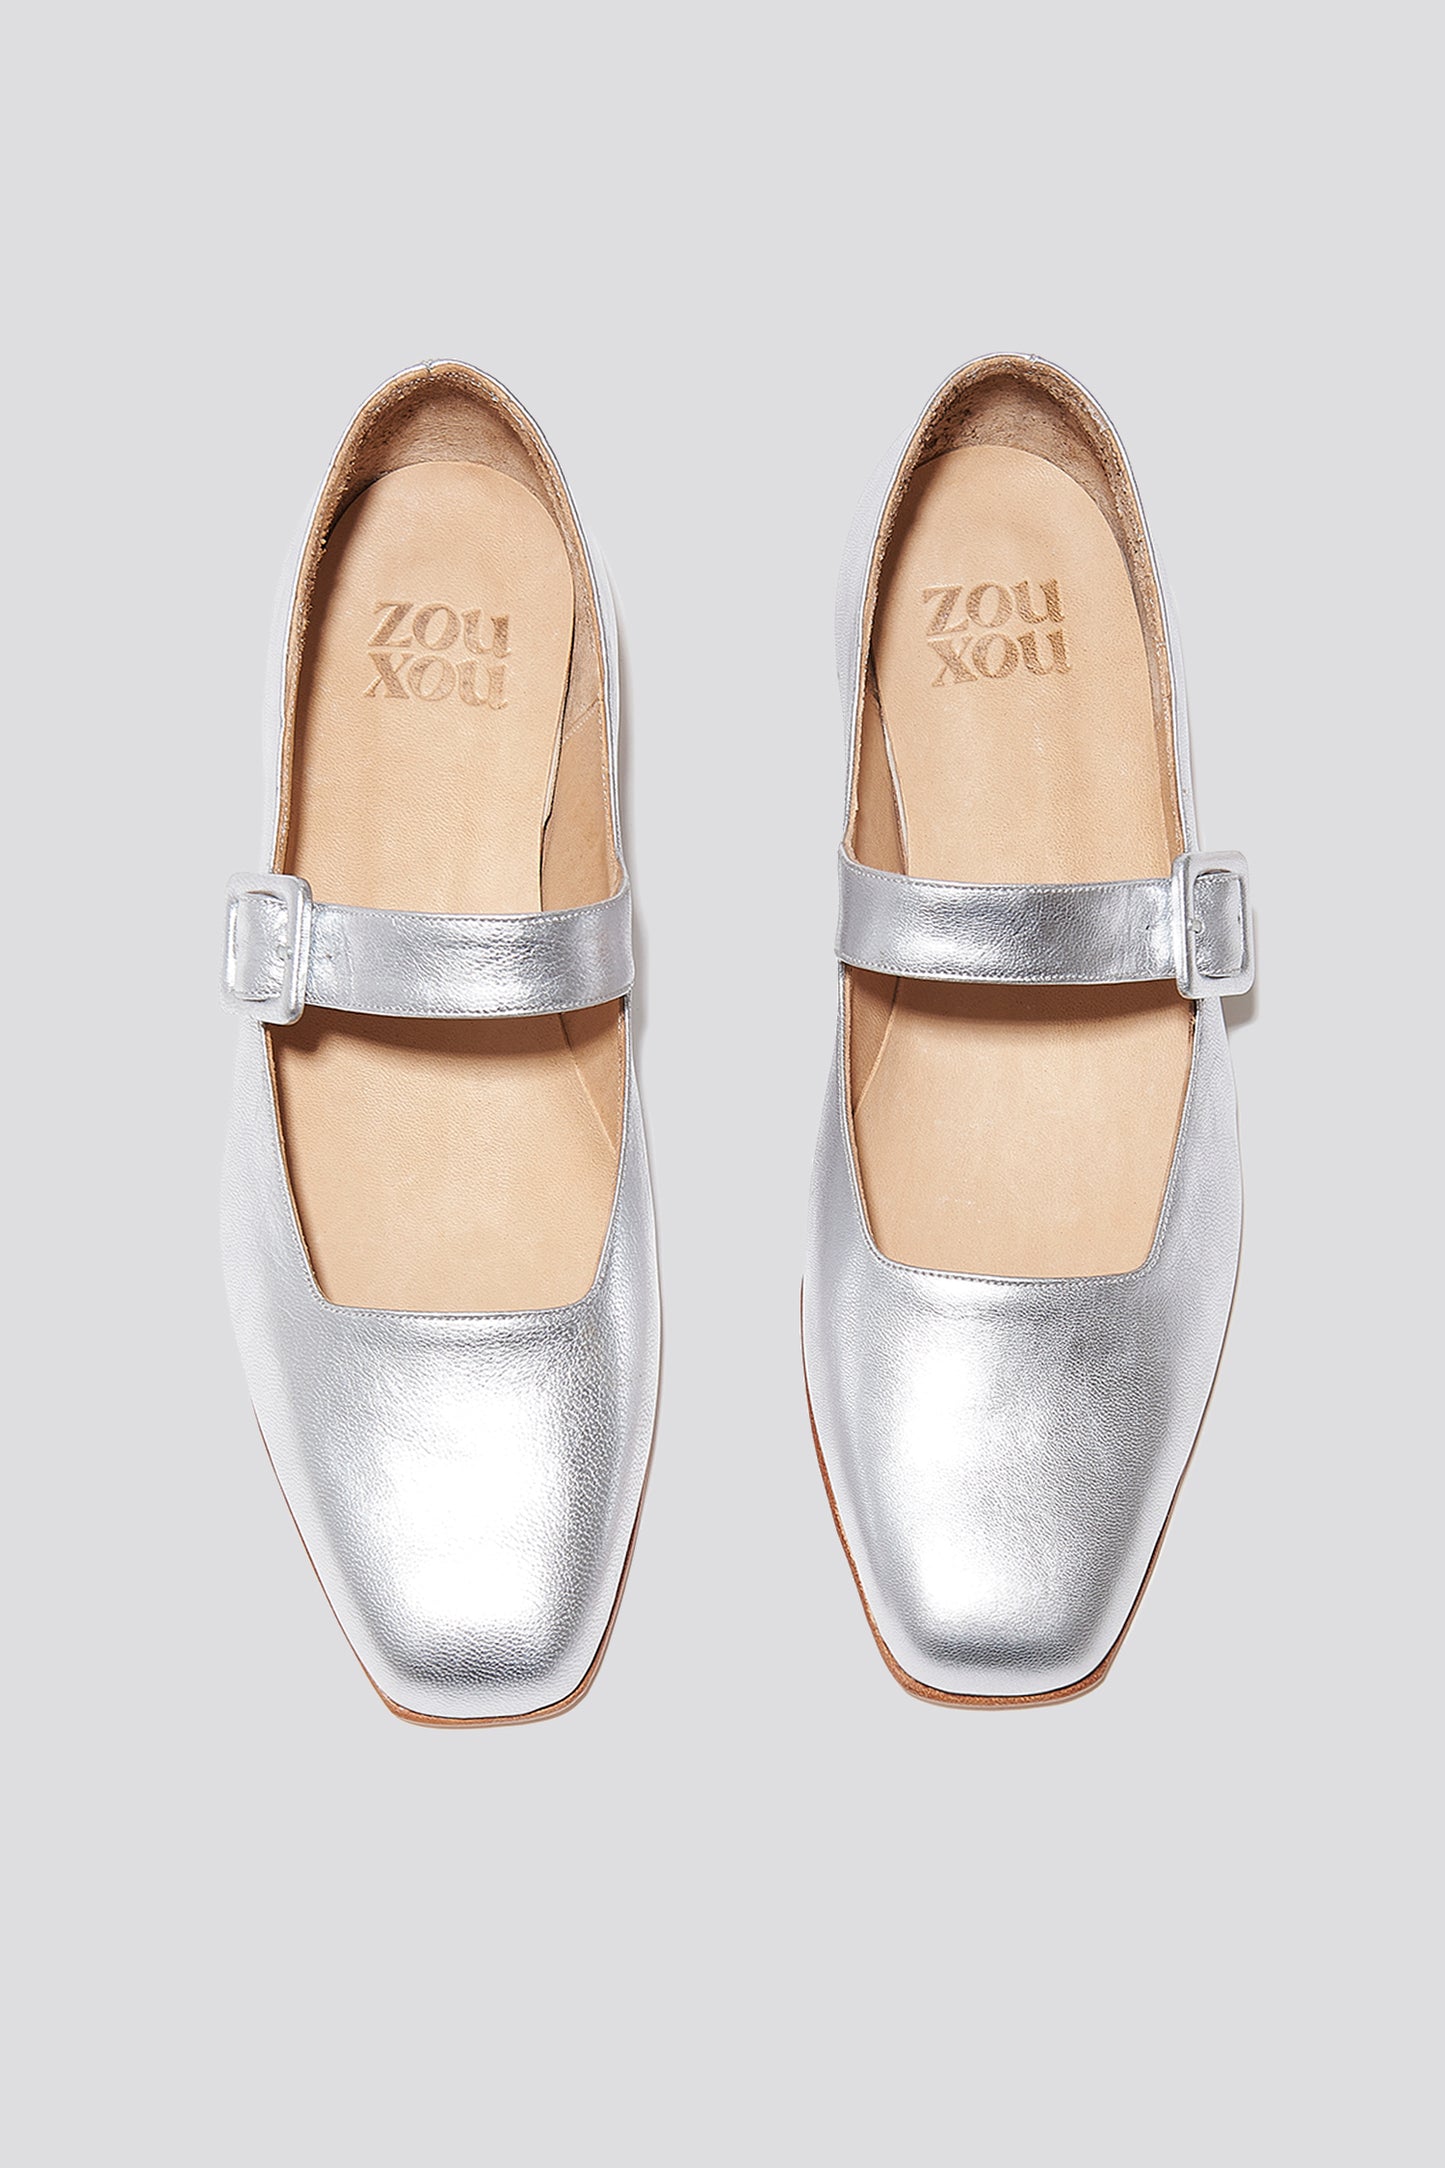 The Eugenia Flat in Silver